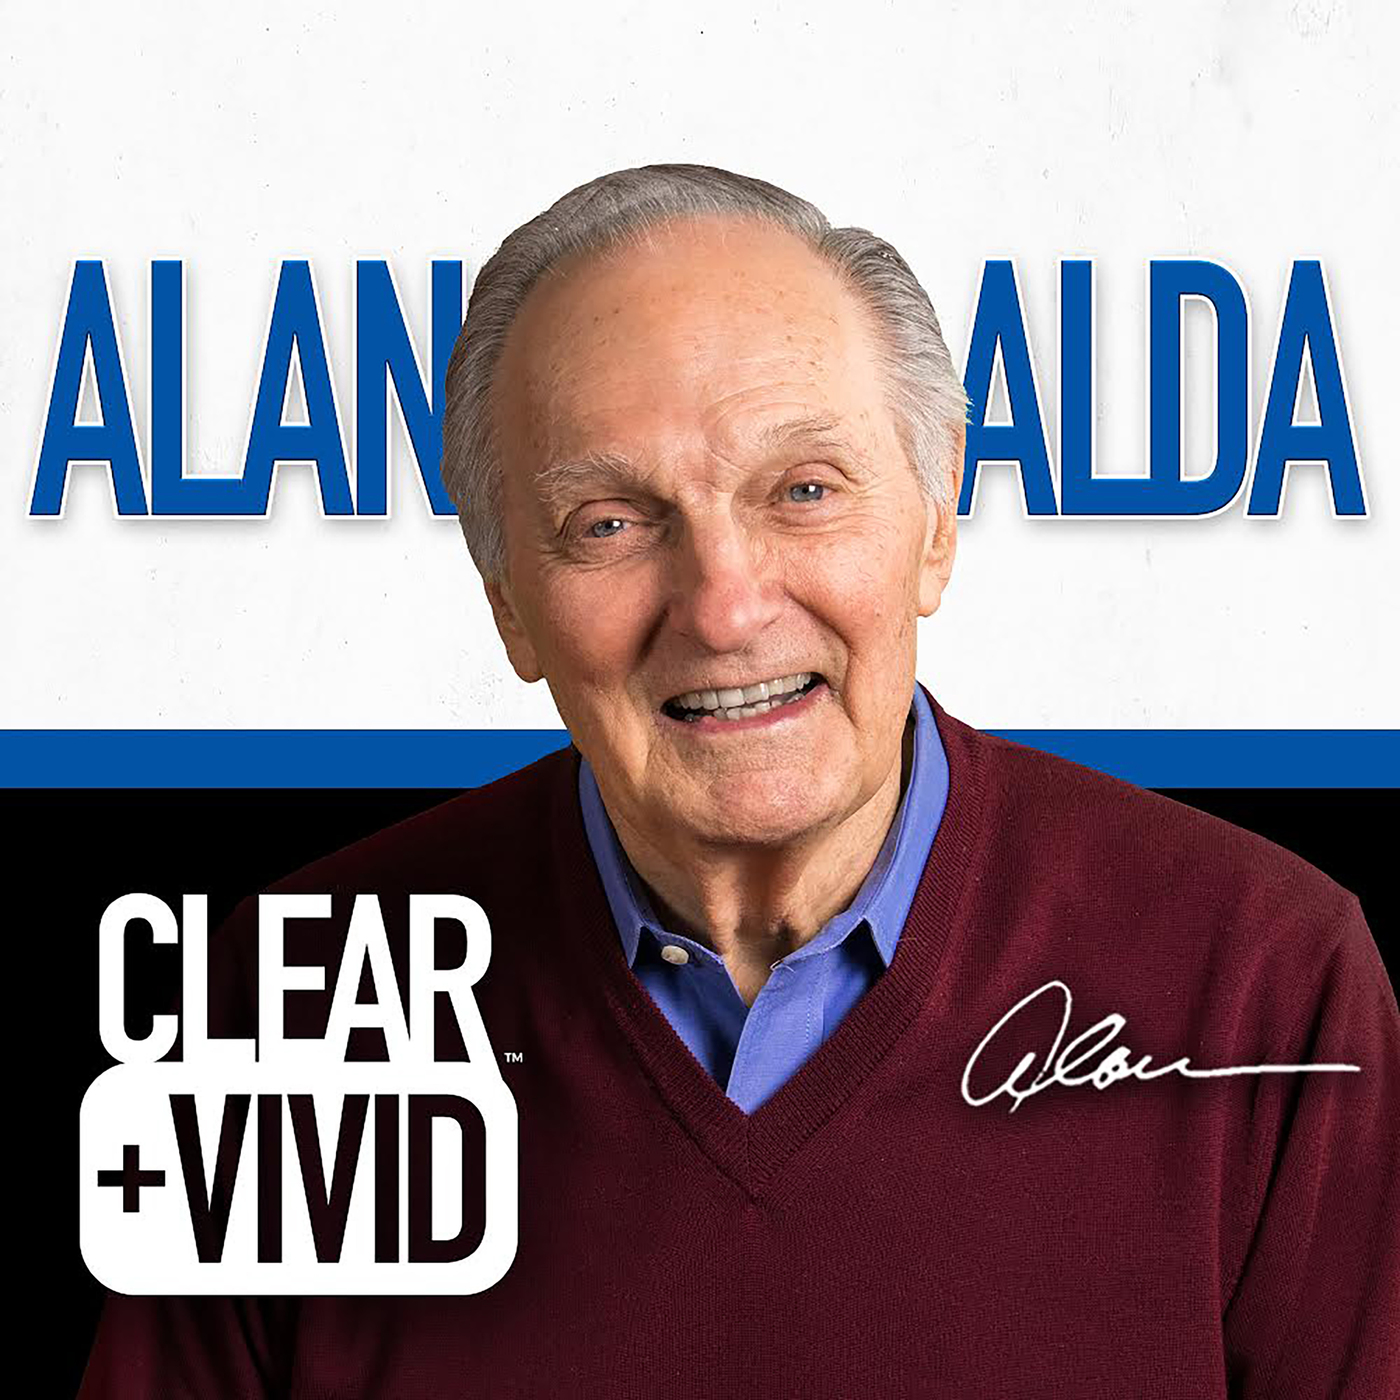 Clear+Vvid with Alan Alda coverart